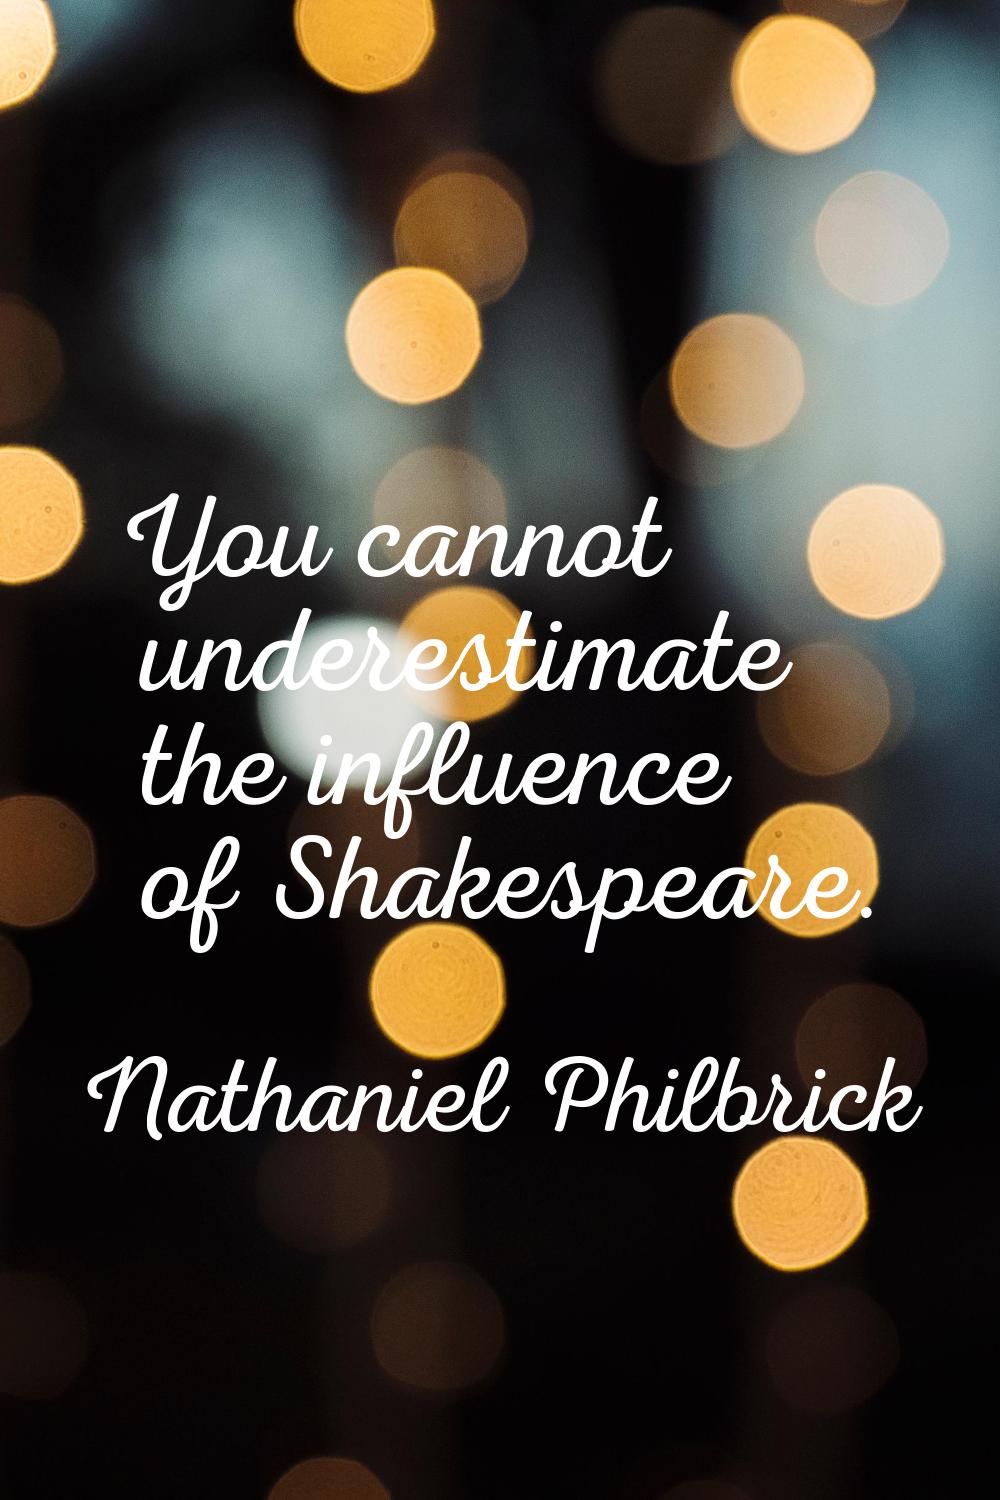 You cannot underestimate the influence of Shakespeare.